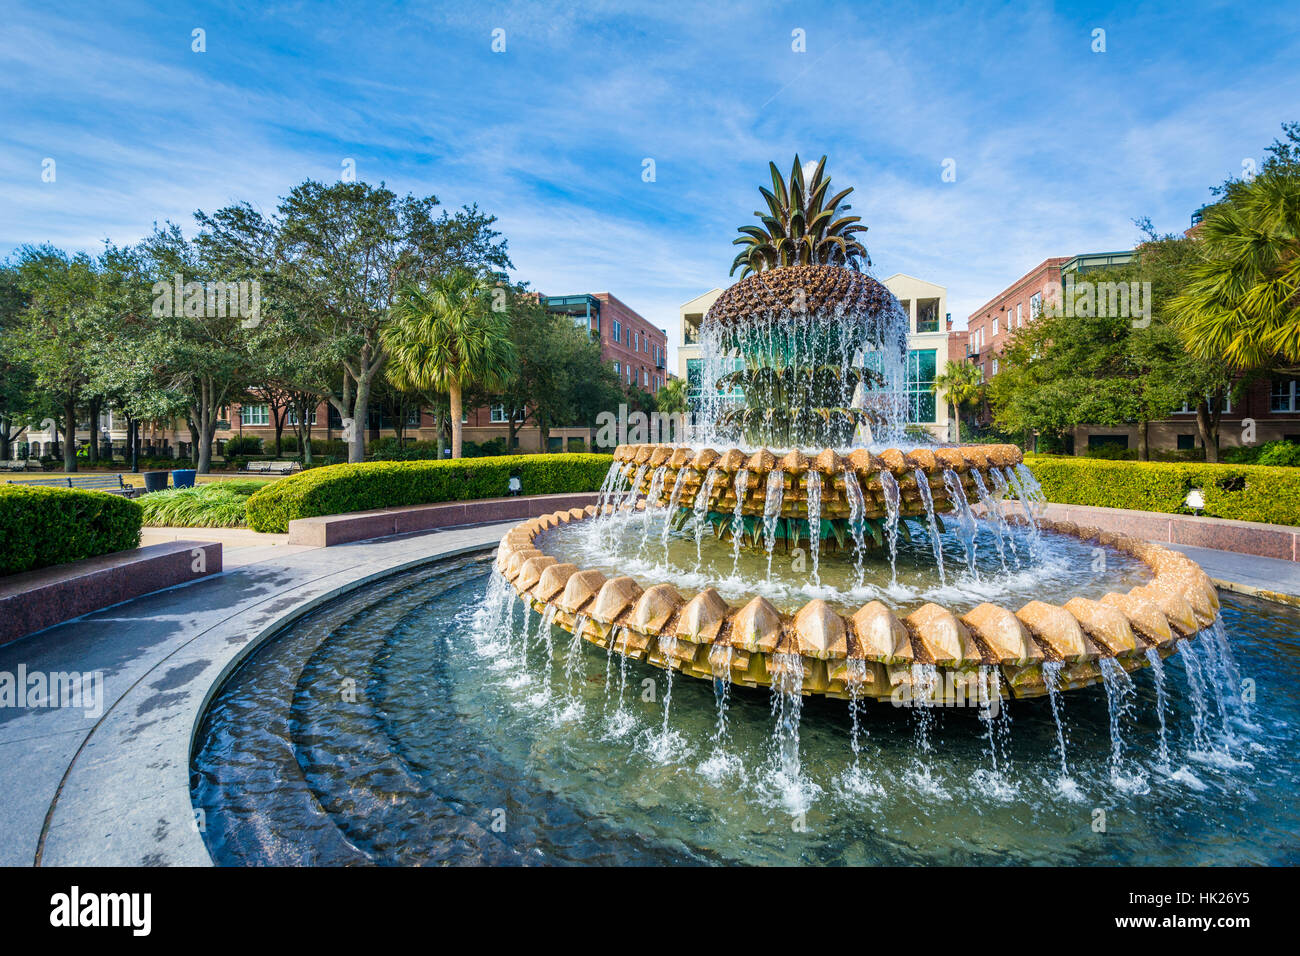 The Pineapple Fountain, at the Waterfront Park in Charleston, South Carolina. Stock Photo